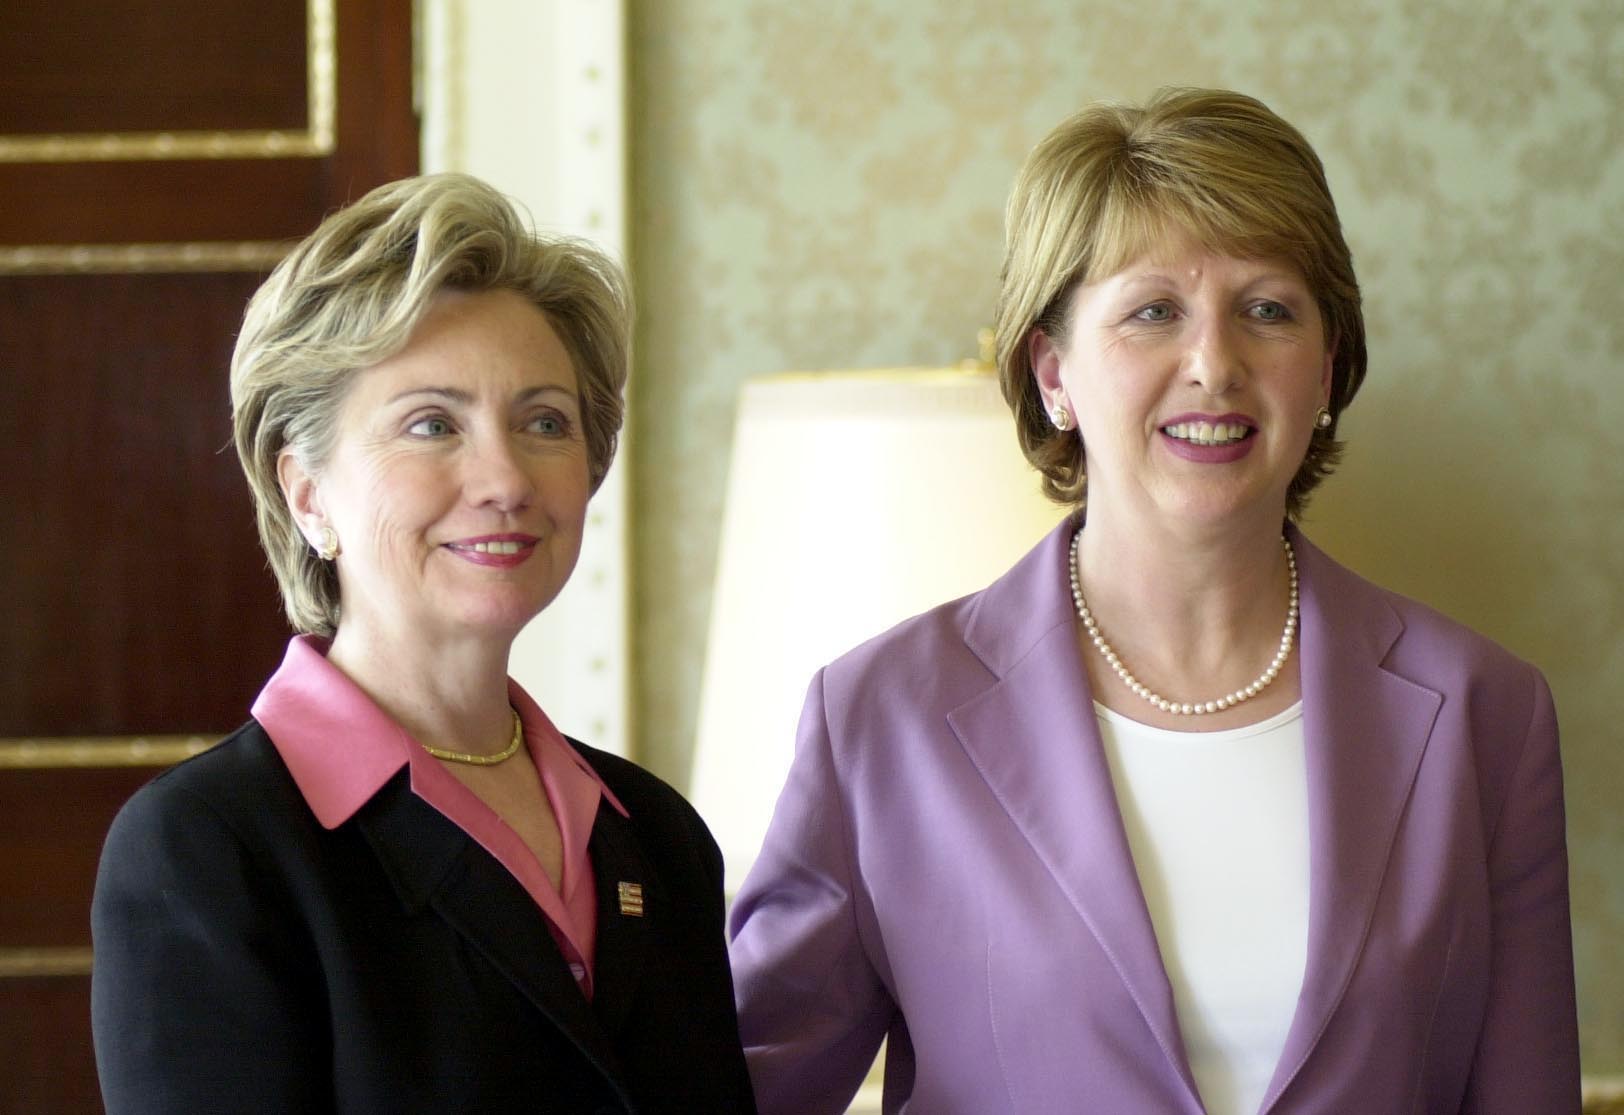 Then-Senator Hillary Rodham Clinton visits President of Ireland Mary McAleese during a visit by the former first lady to Aras An Uachtarain, Dublin. (Photo: Photocall Ireland)